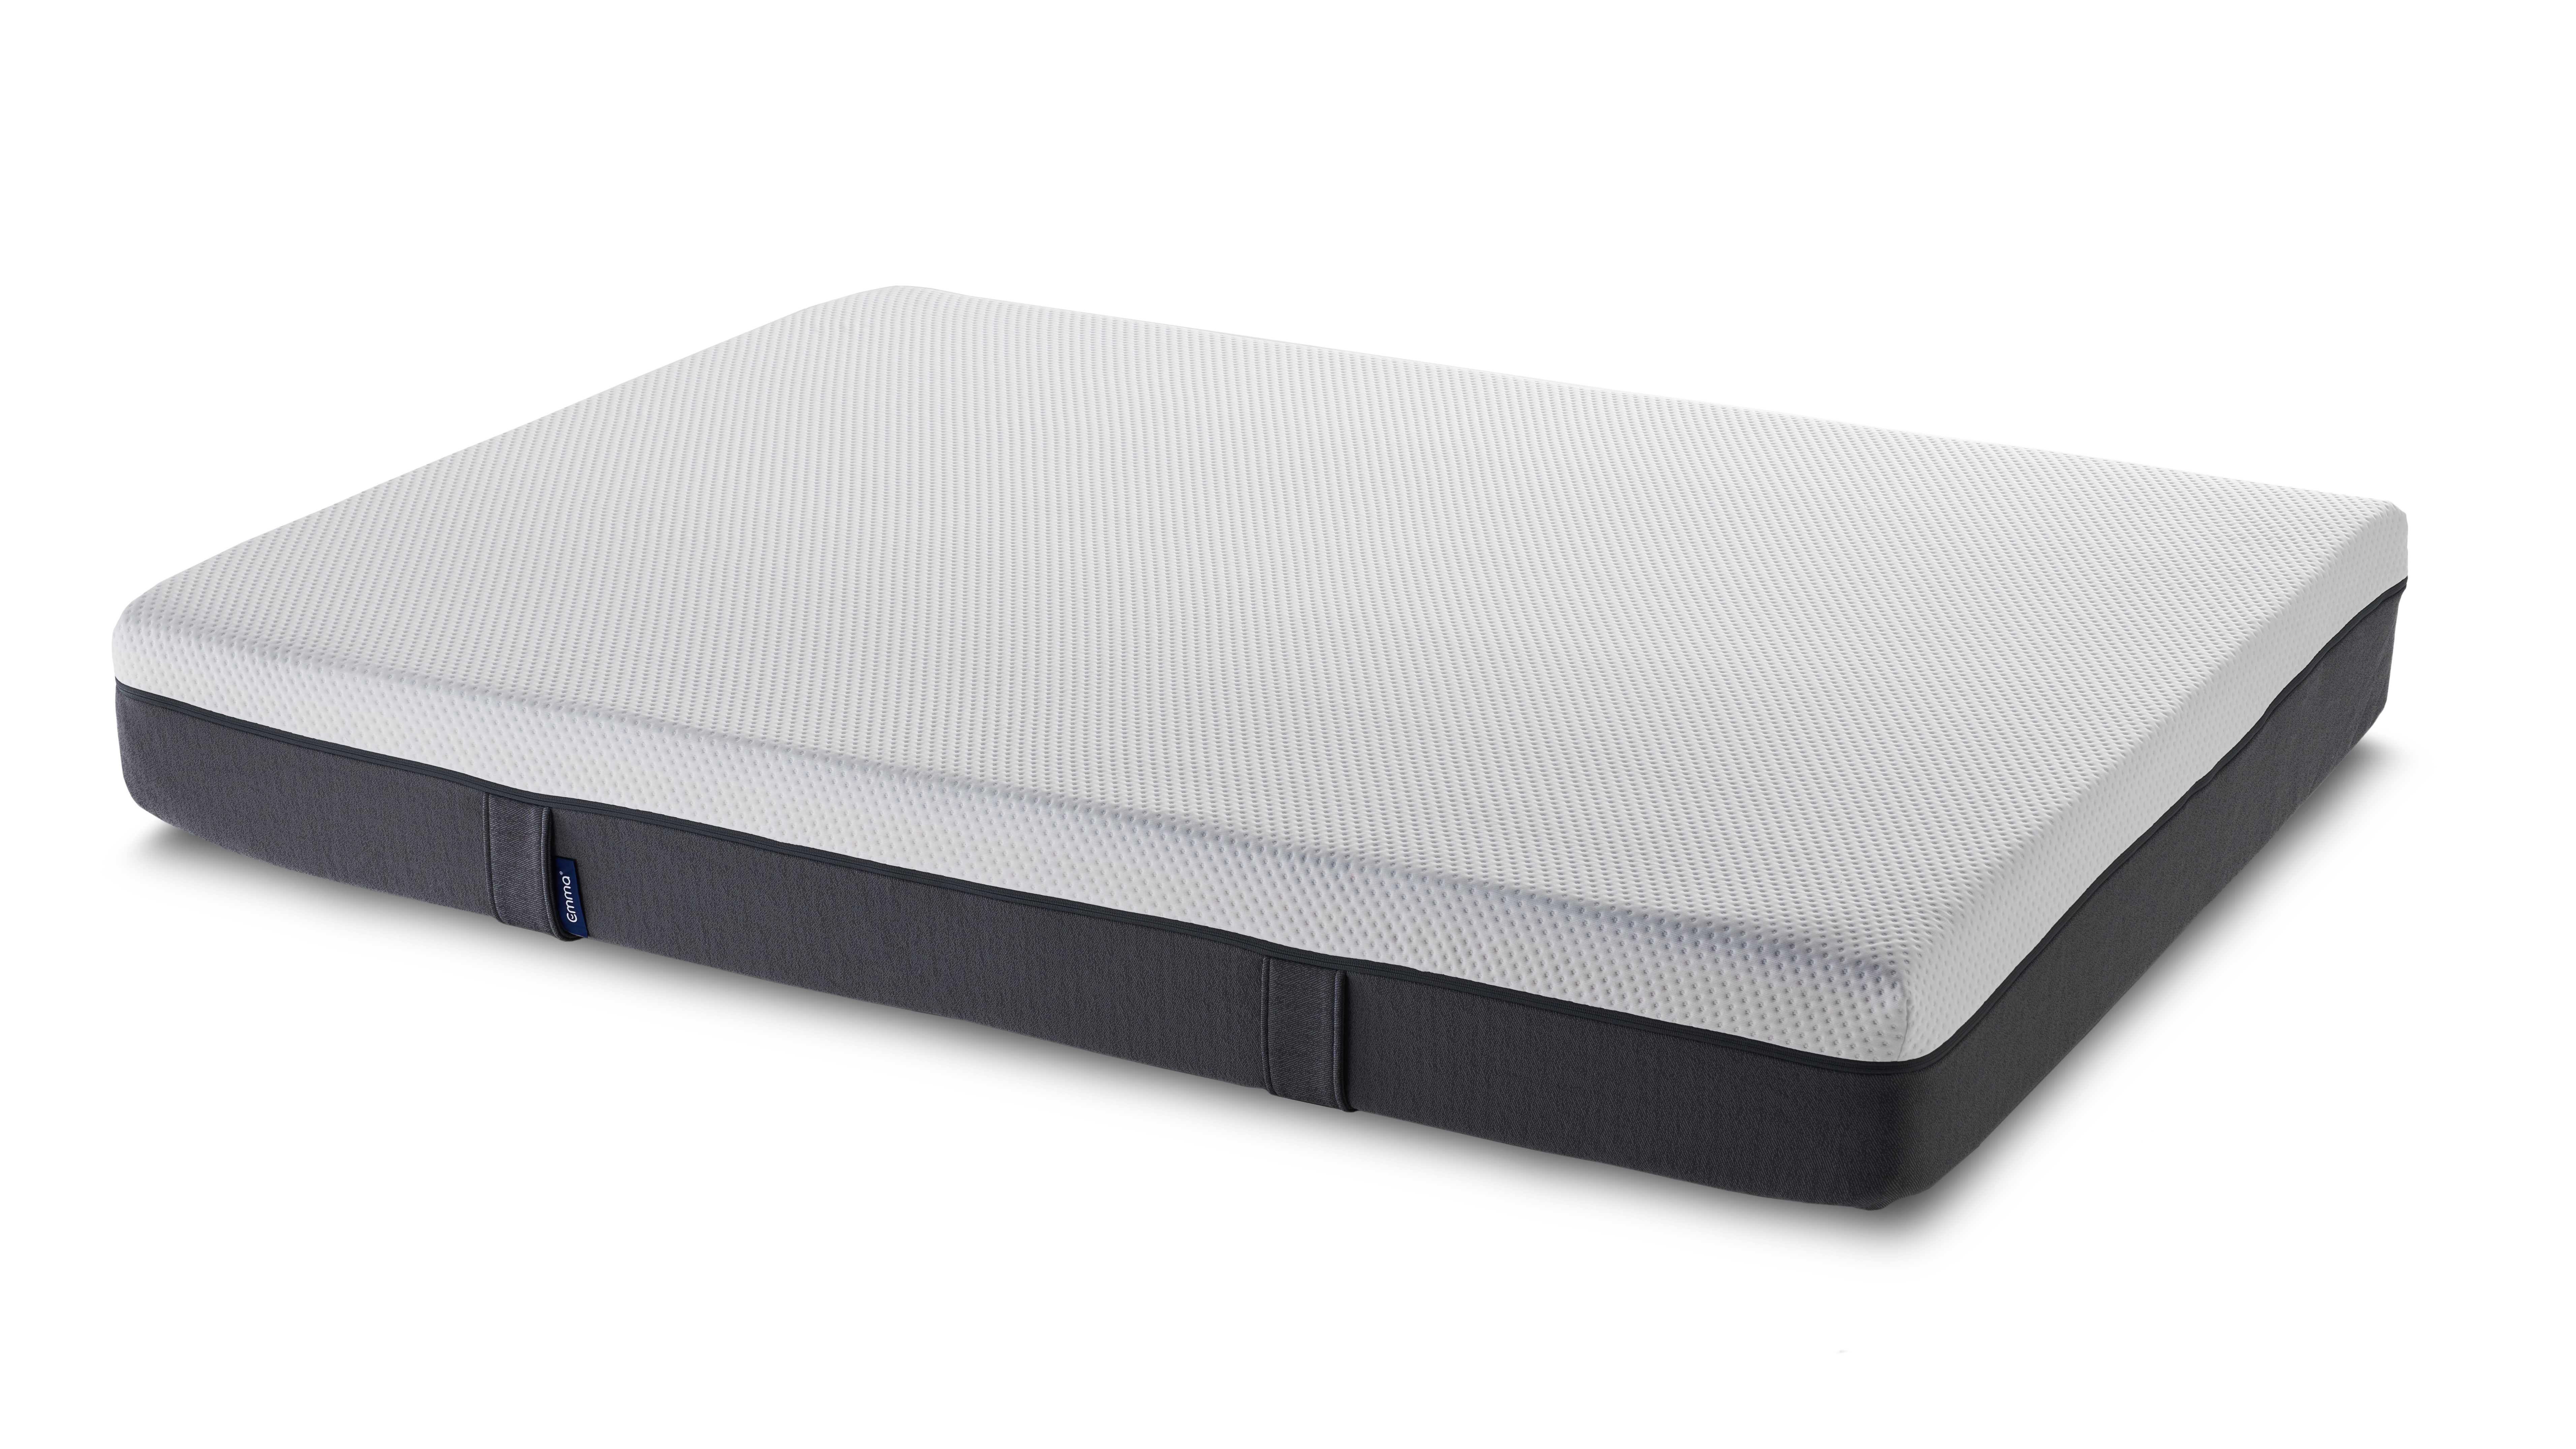 The Emma Original mattress with grey base and a white top